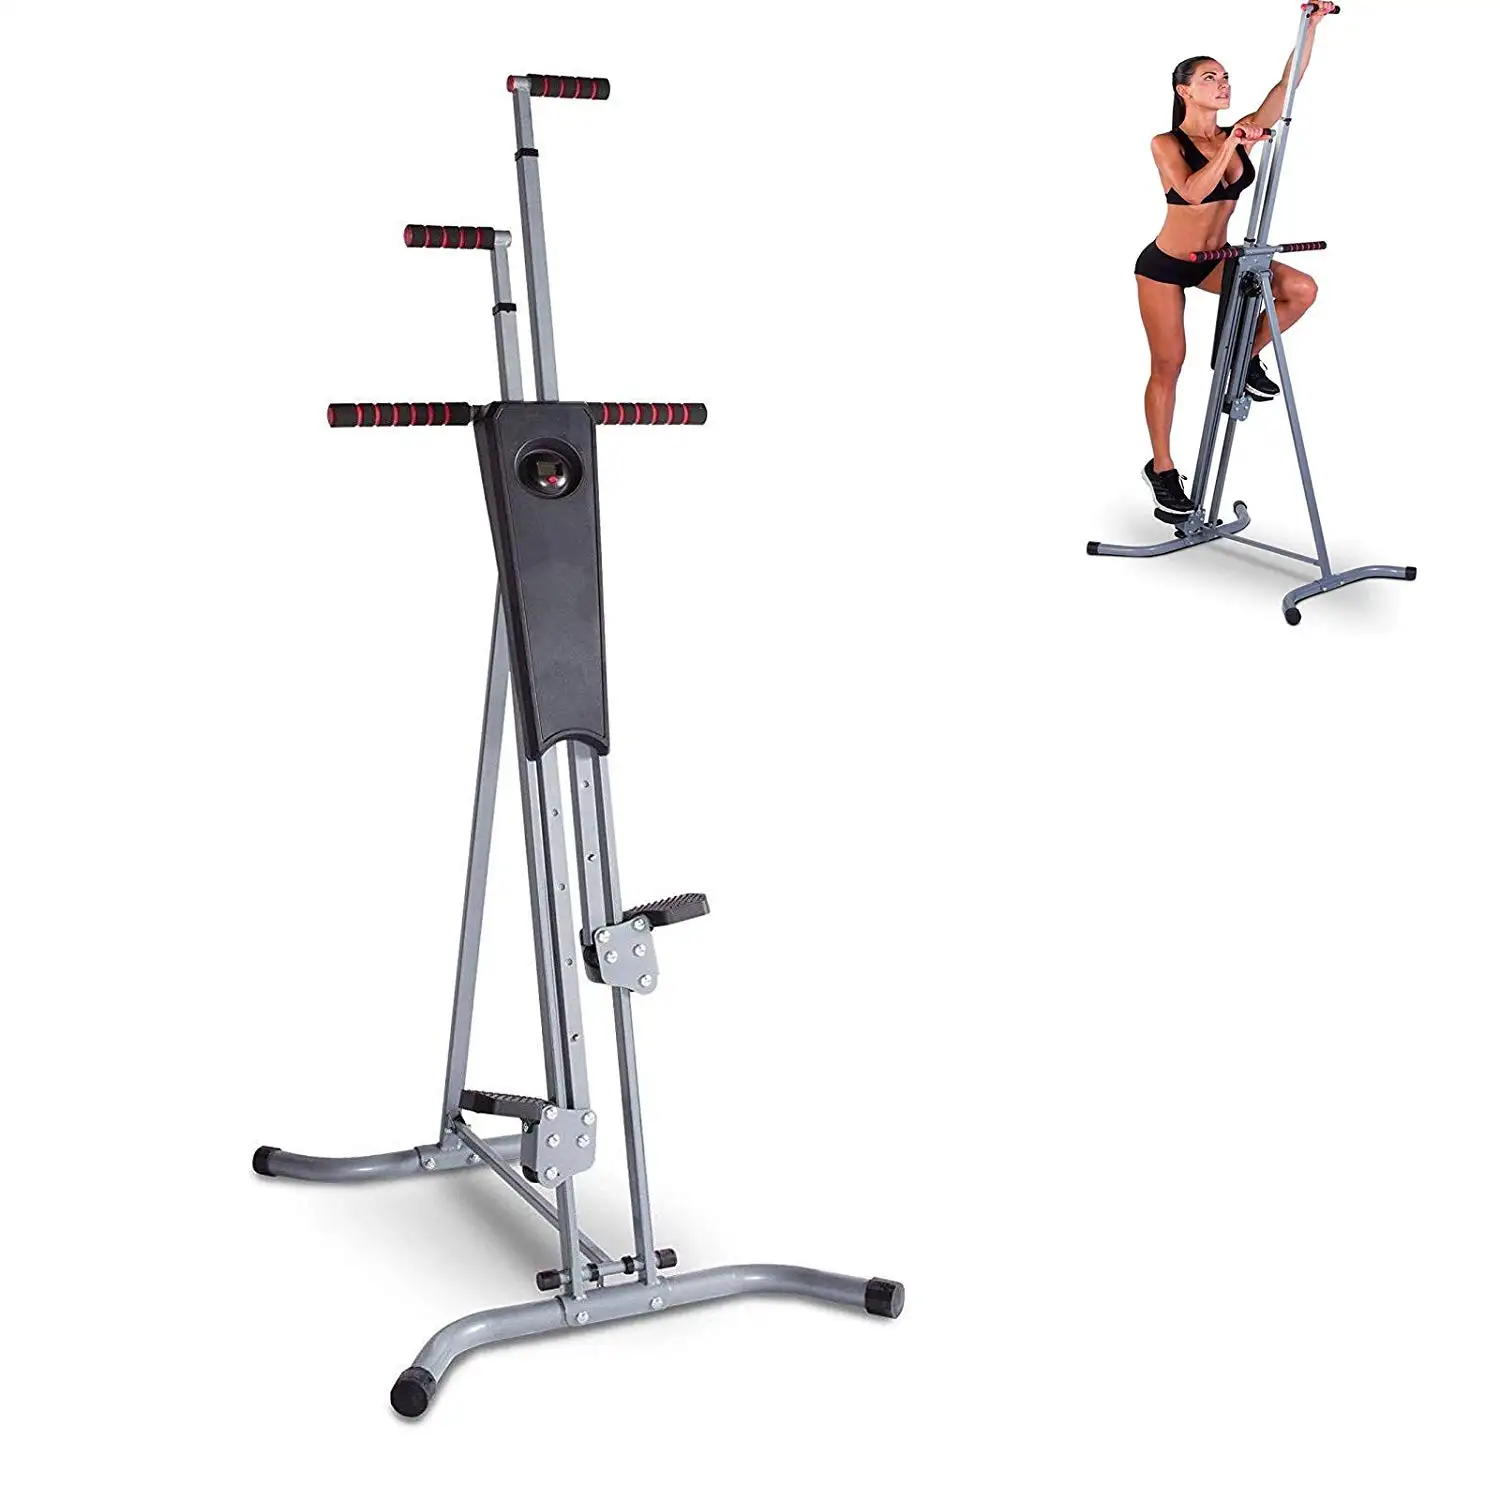 New Step Adjustable Height Gym Equipment Fitness Vertical Manual Climber Rack Exercise Climbing Machine